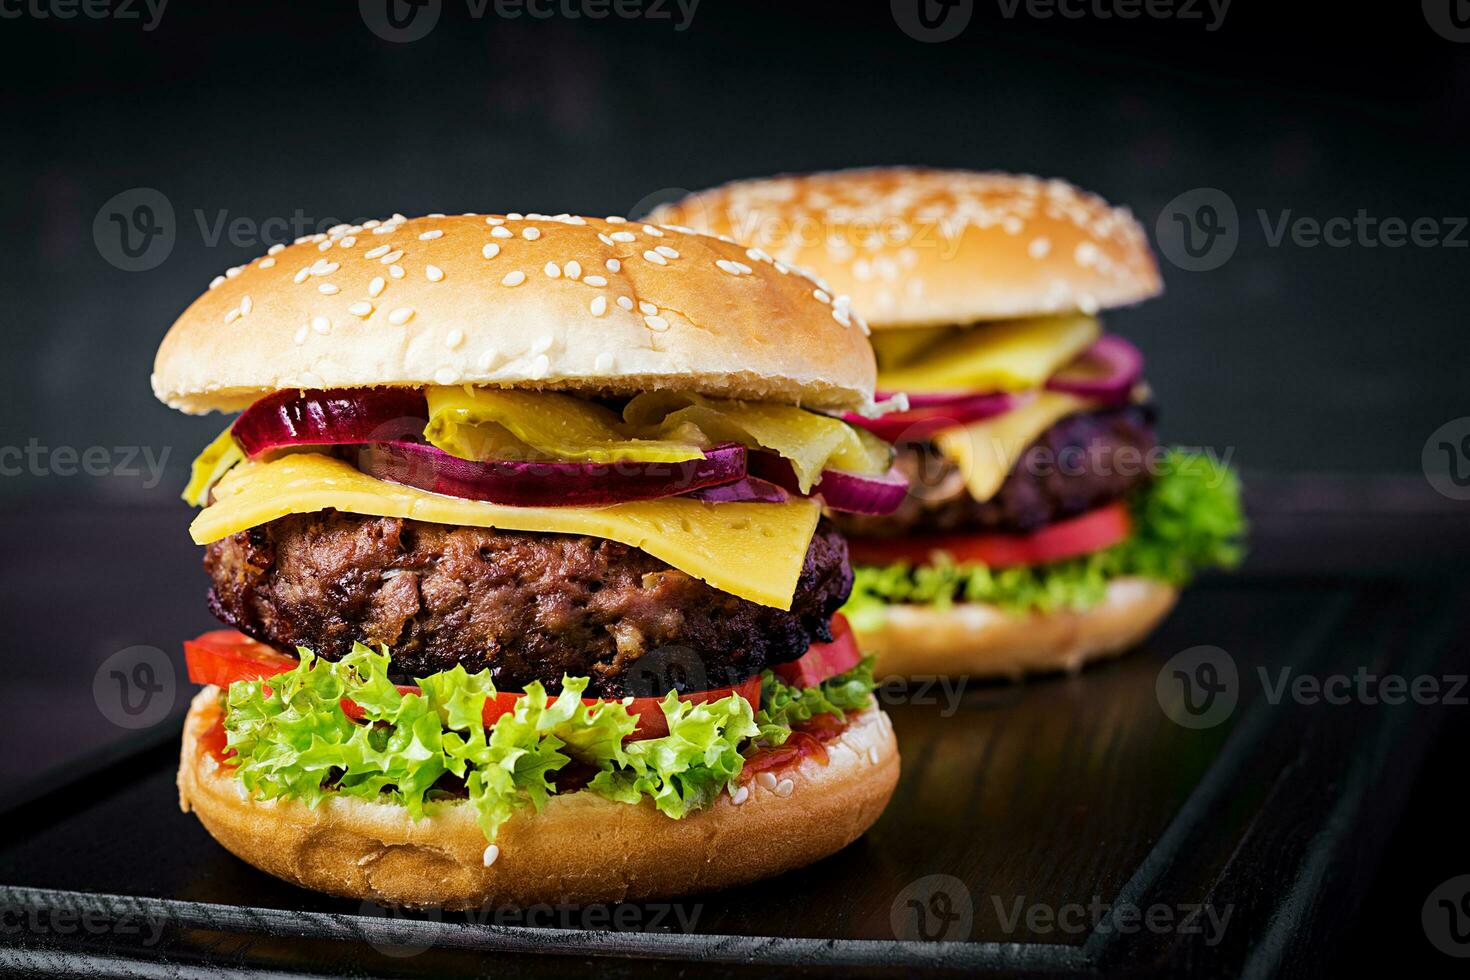 Big sandwich - hamburger burger with beef,  tomato, cheese, pickled cucumber and red onion. photo